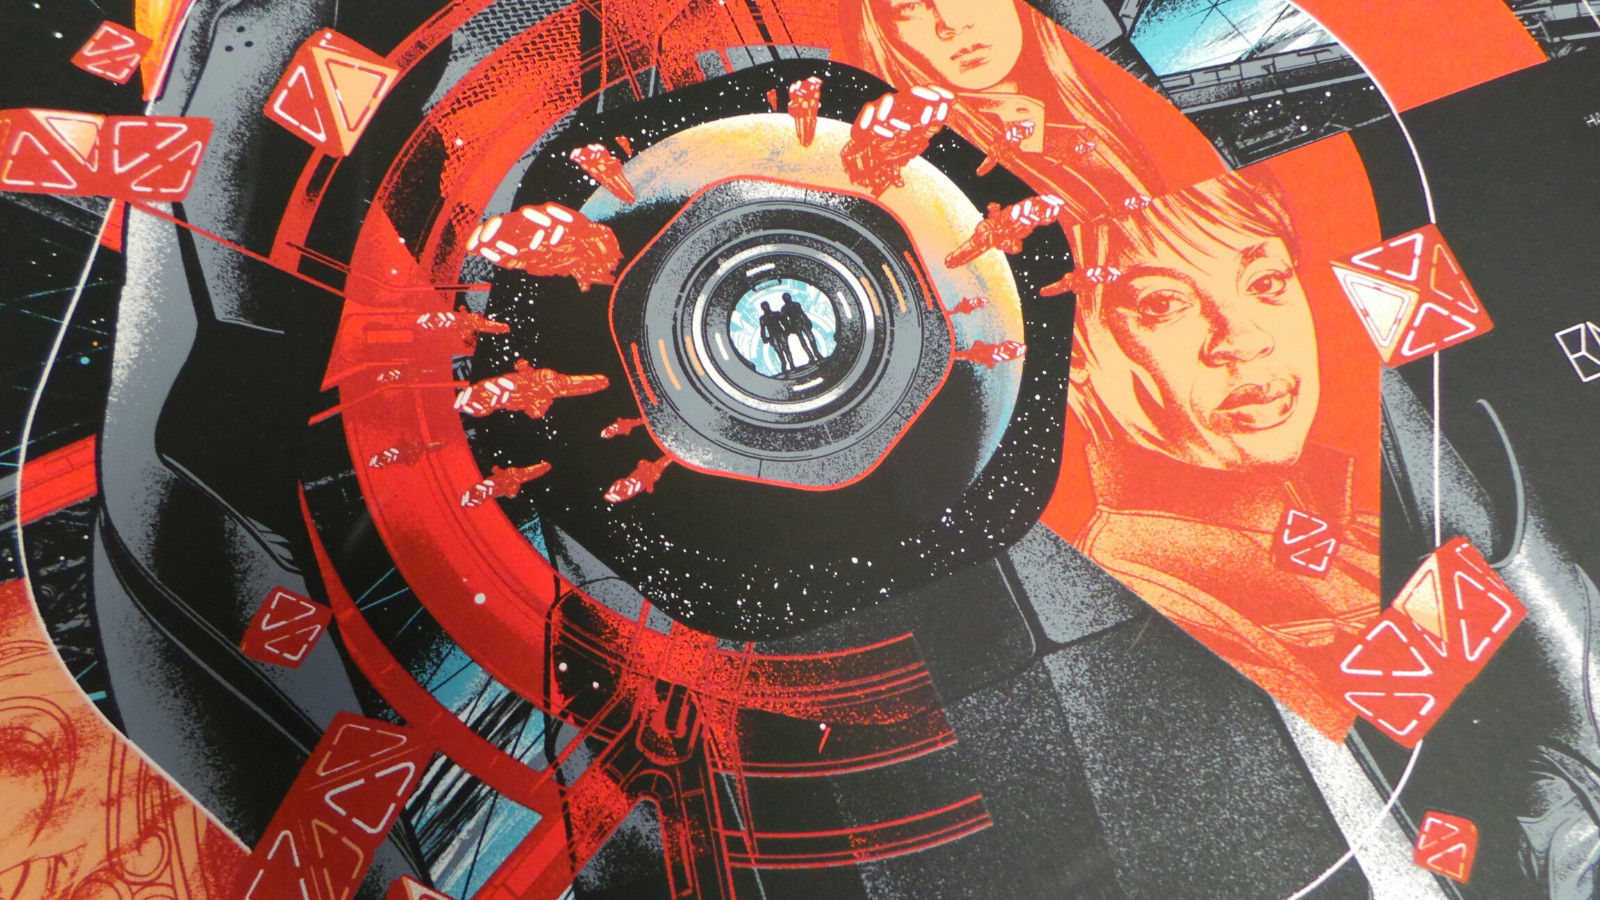 Title:  Ender's Game  Artist:  Martin Ansin for Mondo  Edition:  xx/340  Type:  Screen print poster  Size:  24" x 36"  Notes:  Inspired by the 2013 film Ender's Game, Limited poster in edition of 340.  All prints are stored flat. In house and ready to ship!  Following purchase, all prints are rolled in archival paper and shipped in a sturdy cardboard tube which is bubble wrapped on the inside for each end.